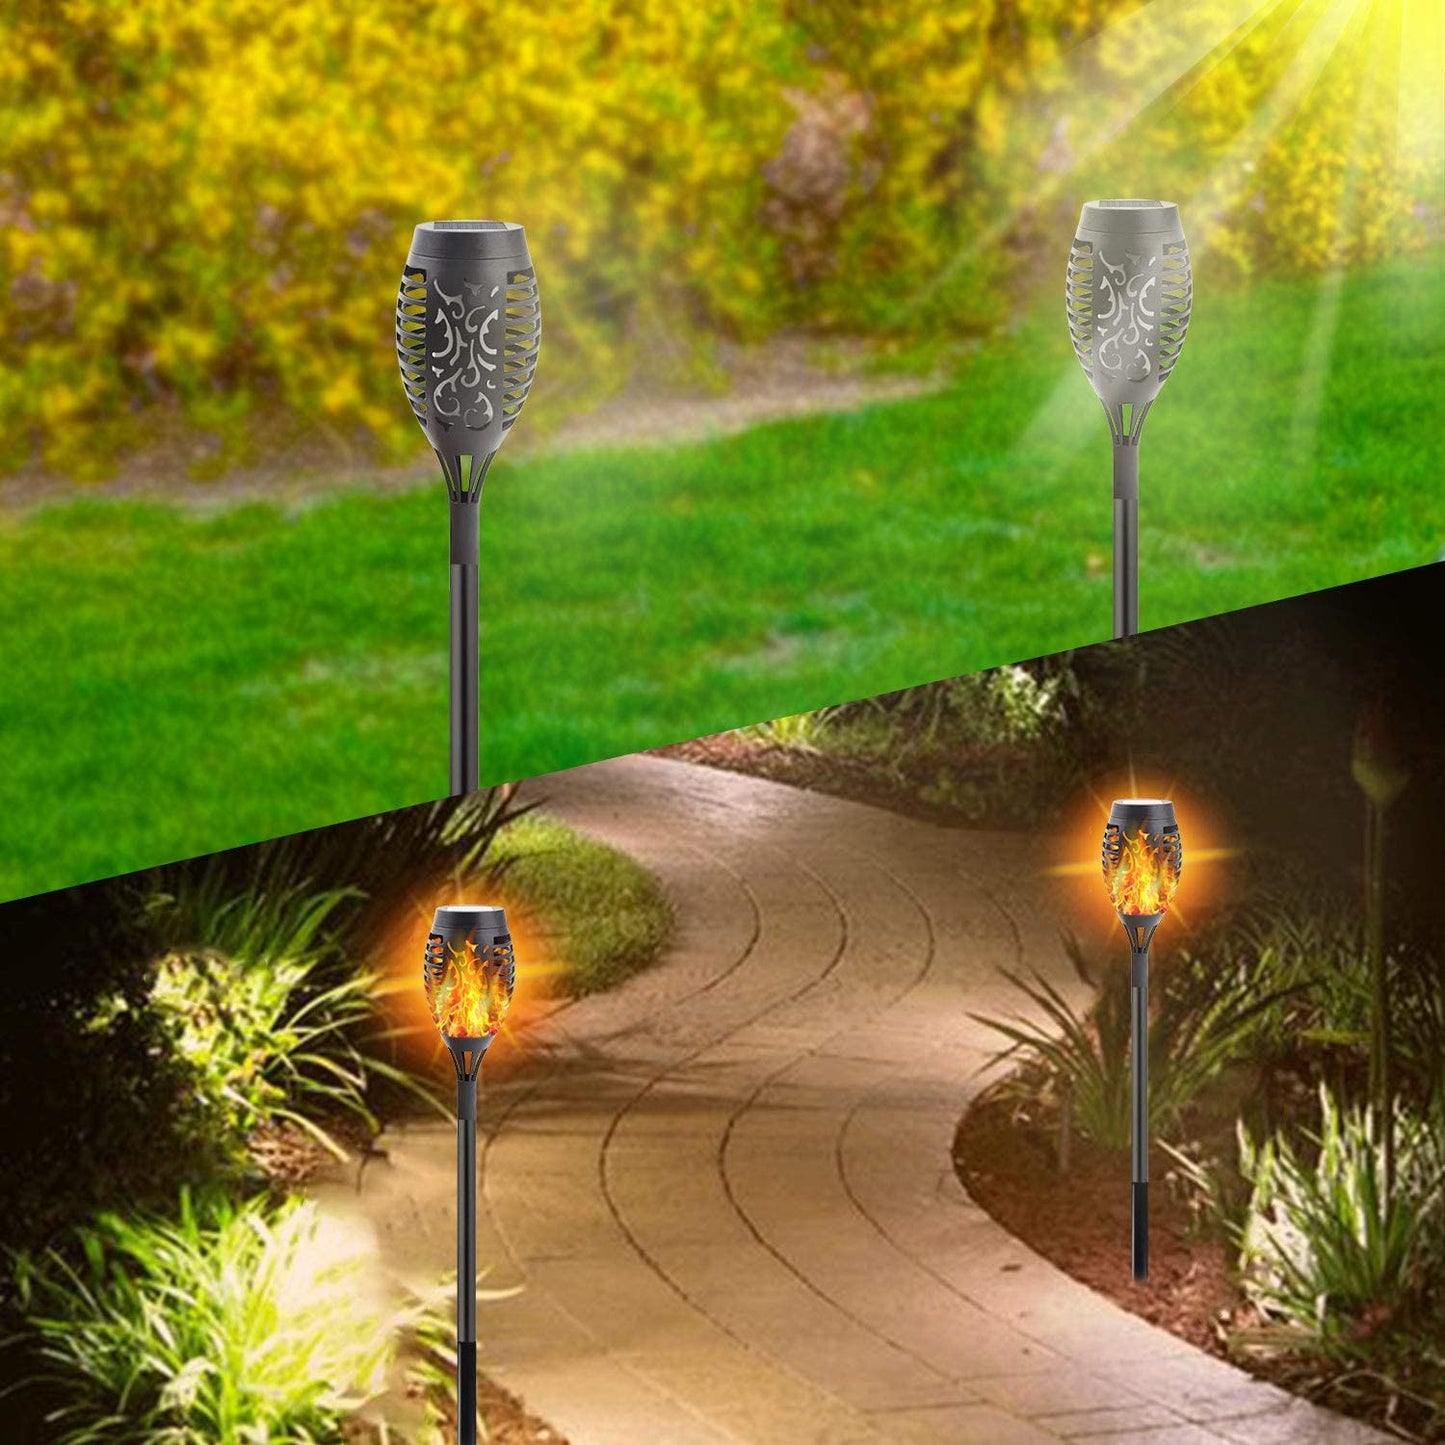 KAQ 4PK 20In Solar Lights Outdoor, Upgraded Solar Torch Light with Flickering Flame, Dusk to Dawn Auto On/Off Waterproof Landscape Lighting for Patio Pathway Garden Yard Decorations